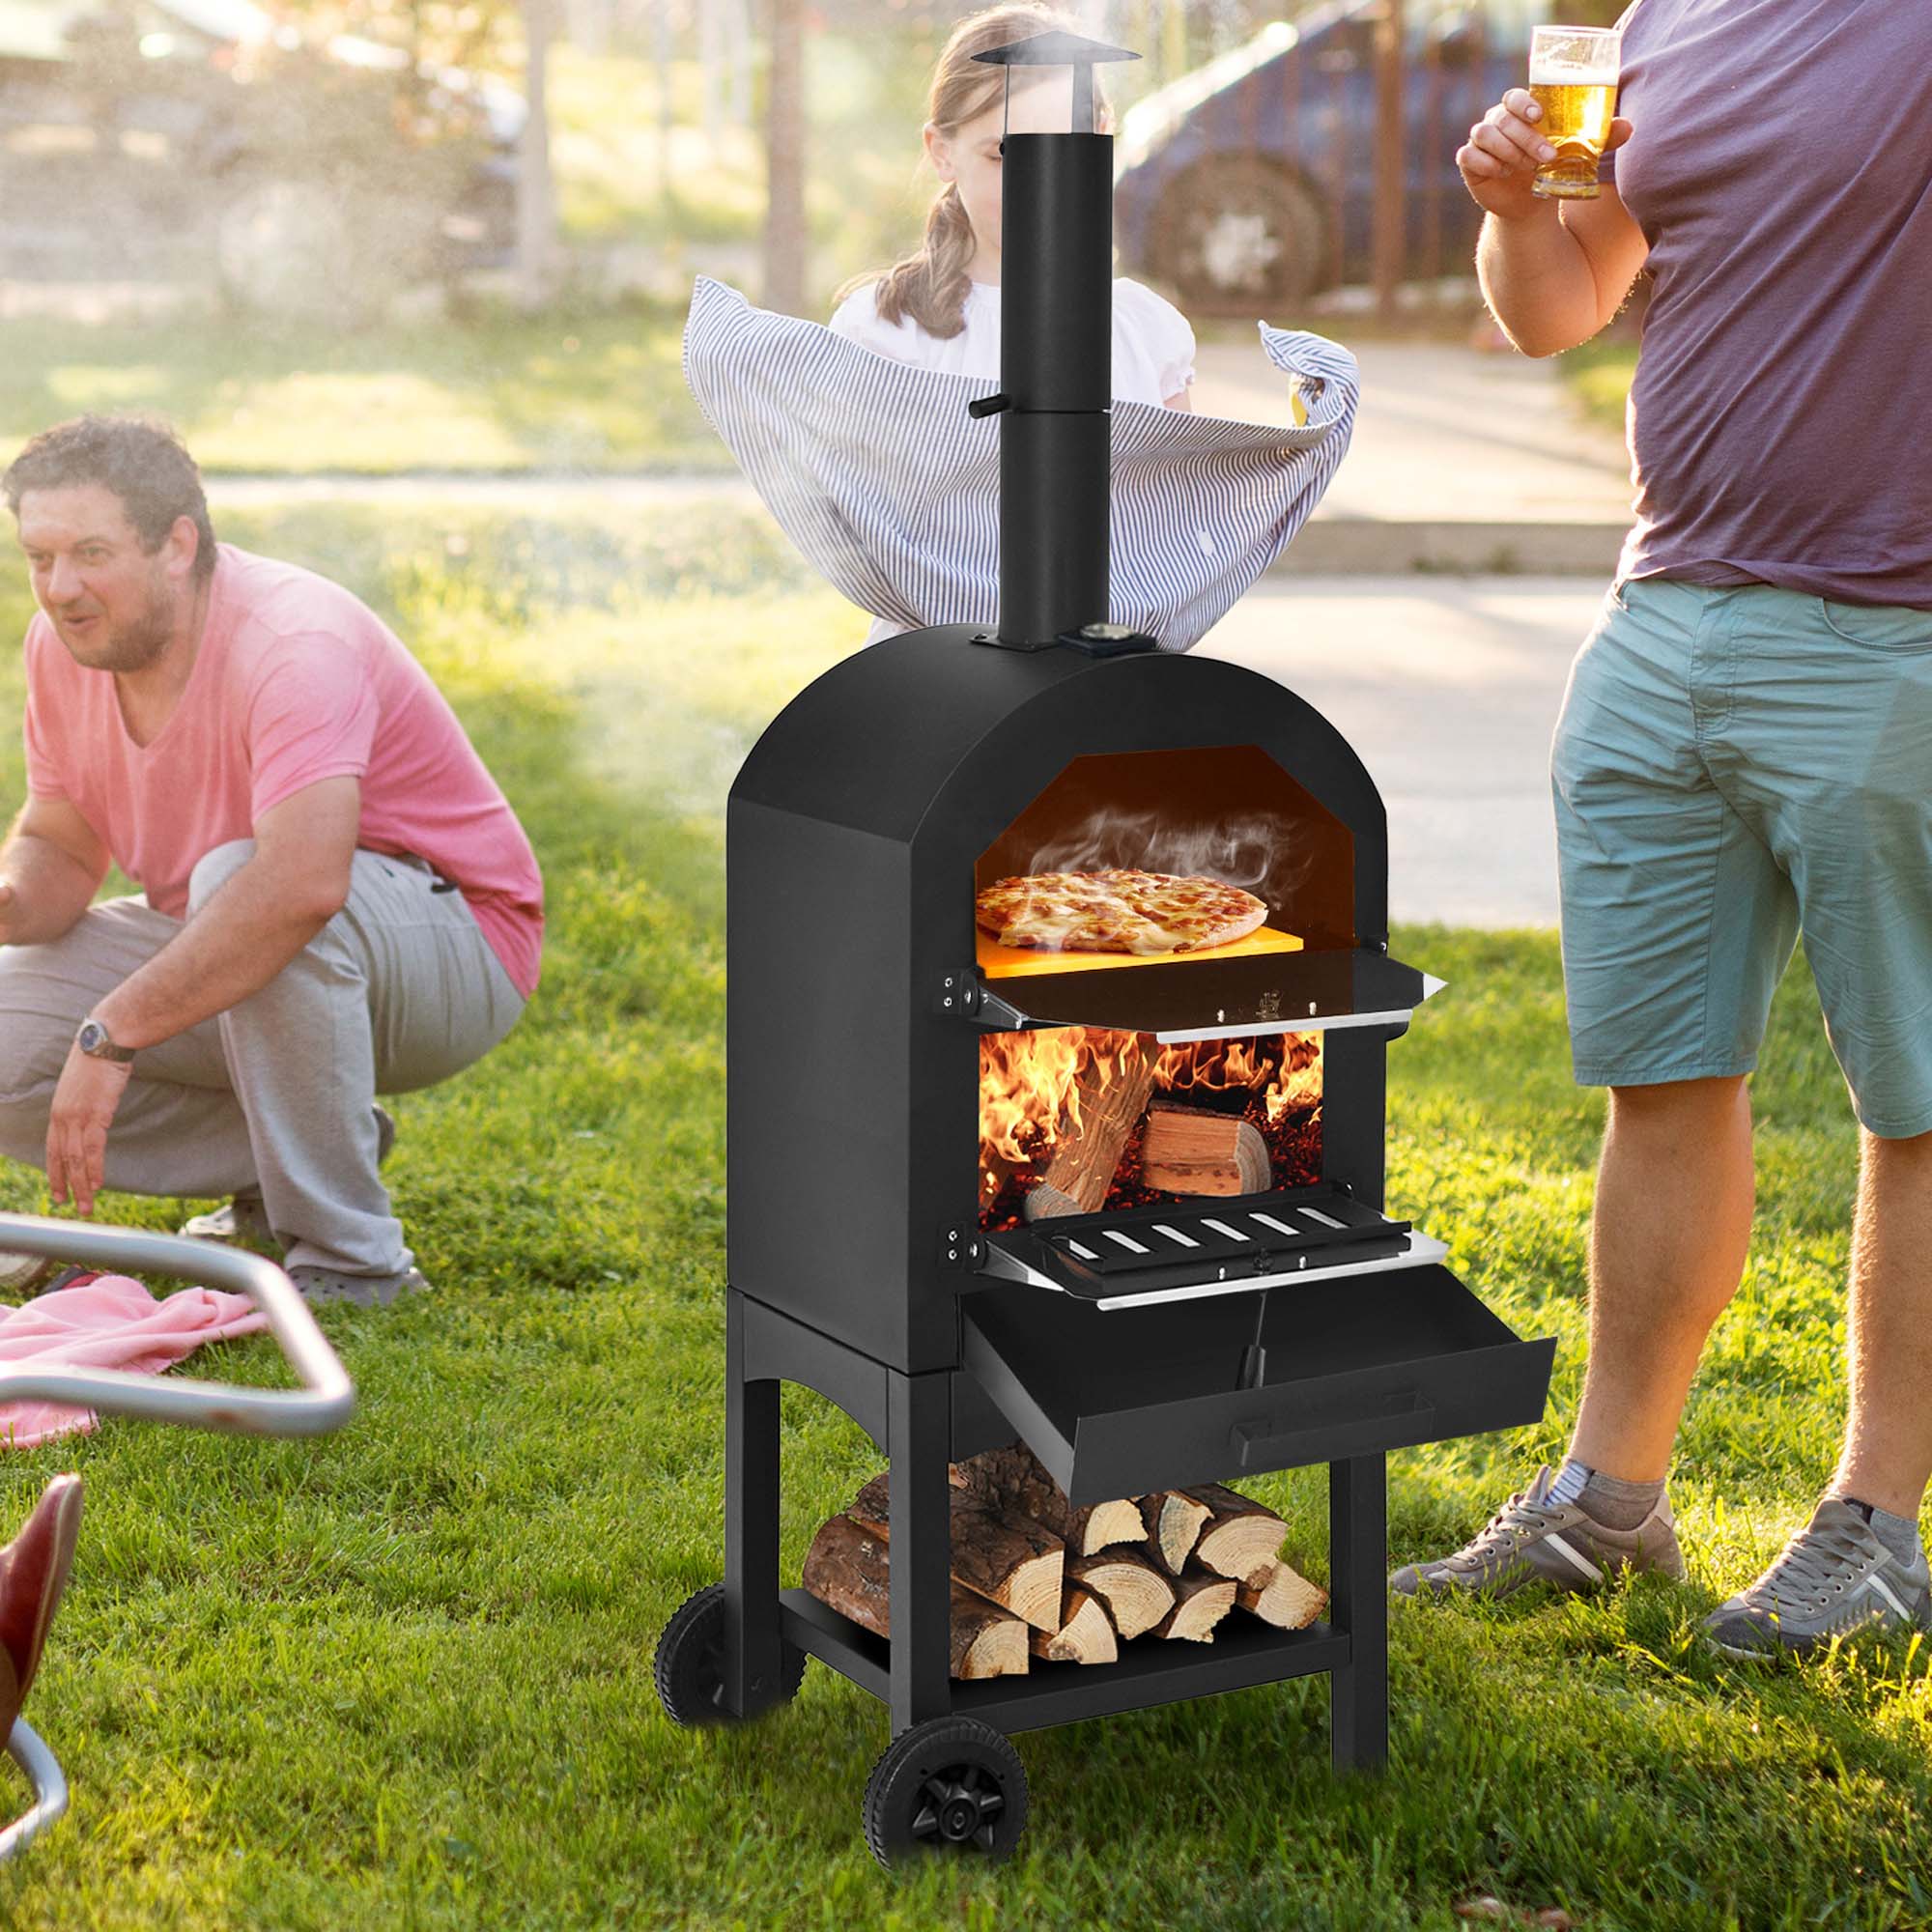 Costway Outdoor Pizza Oven Wood Fire Pizza Maker Grill w/ Pizza Stone & Waterproof Cover - image 4 of 10